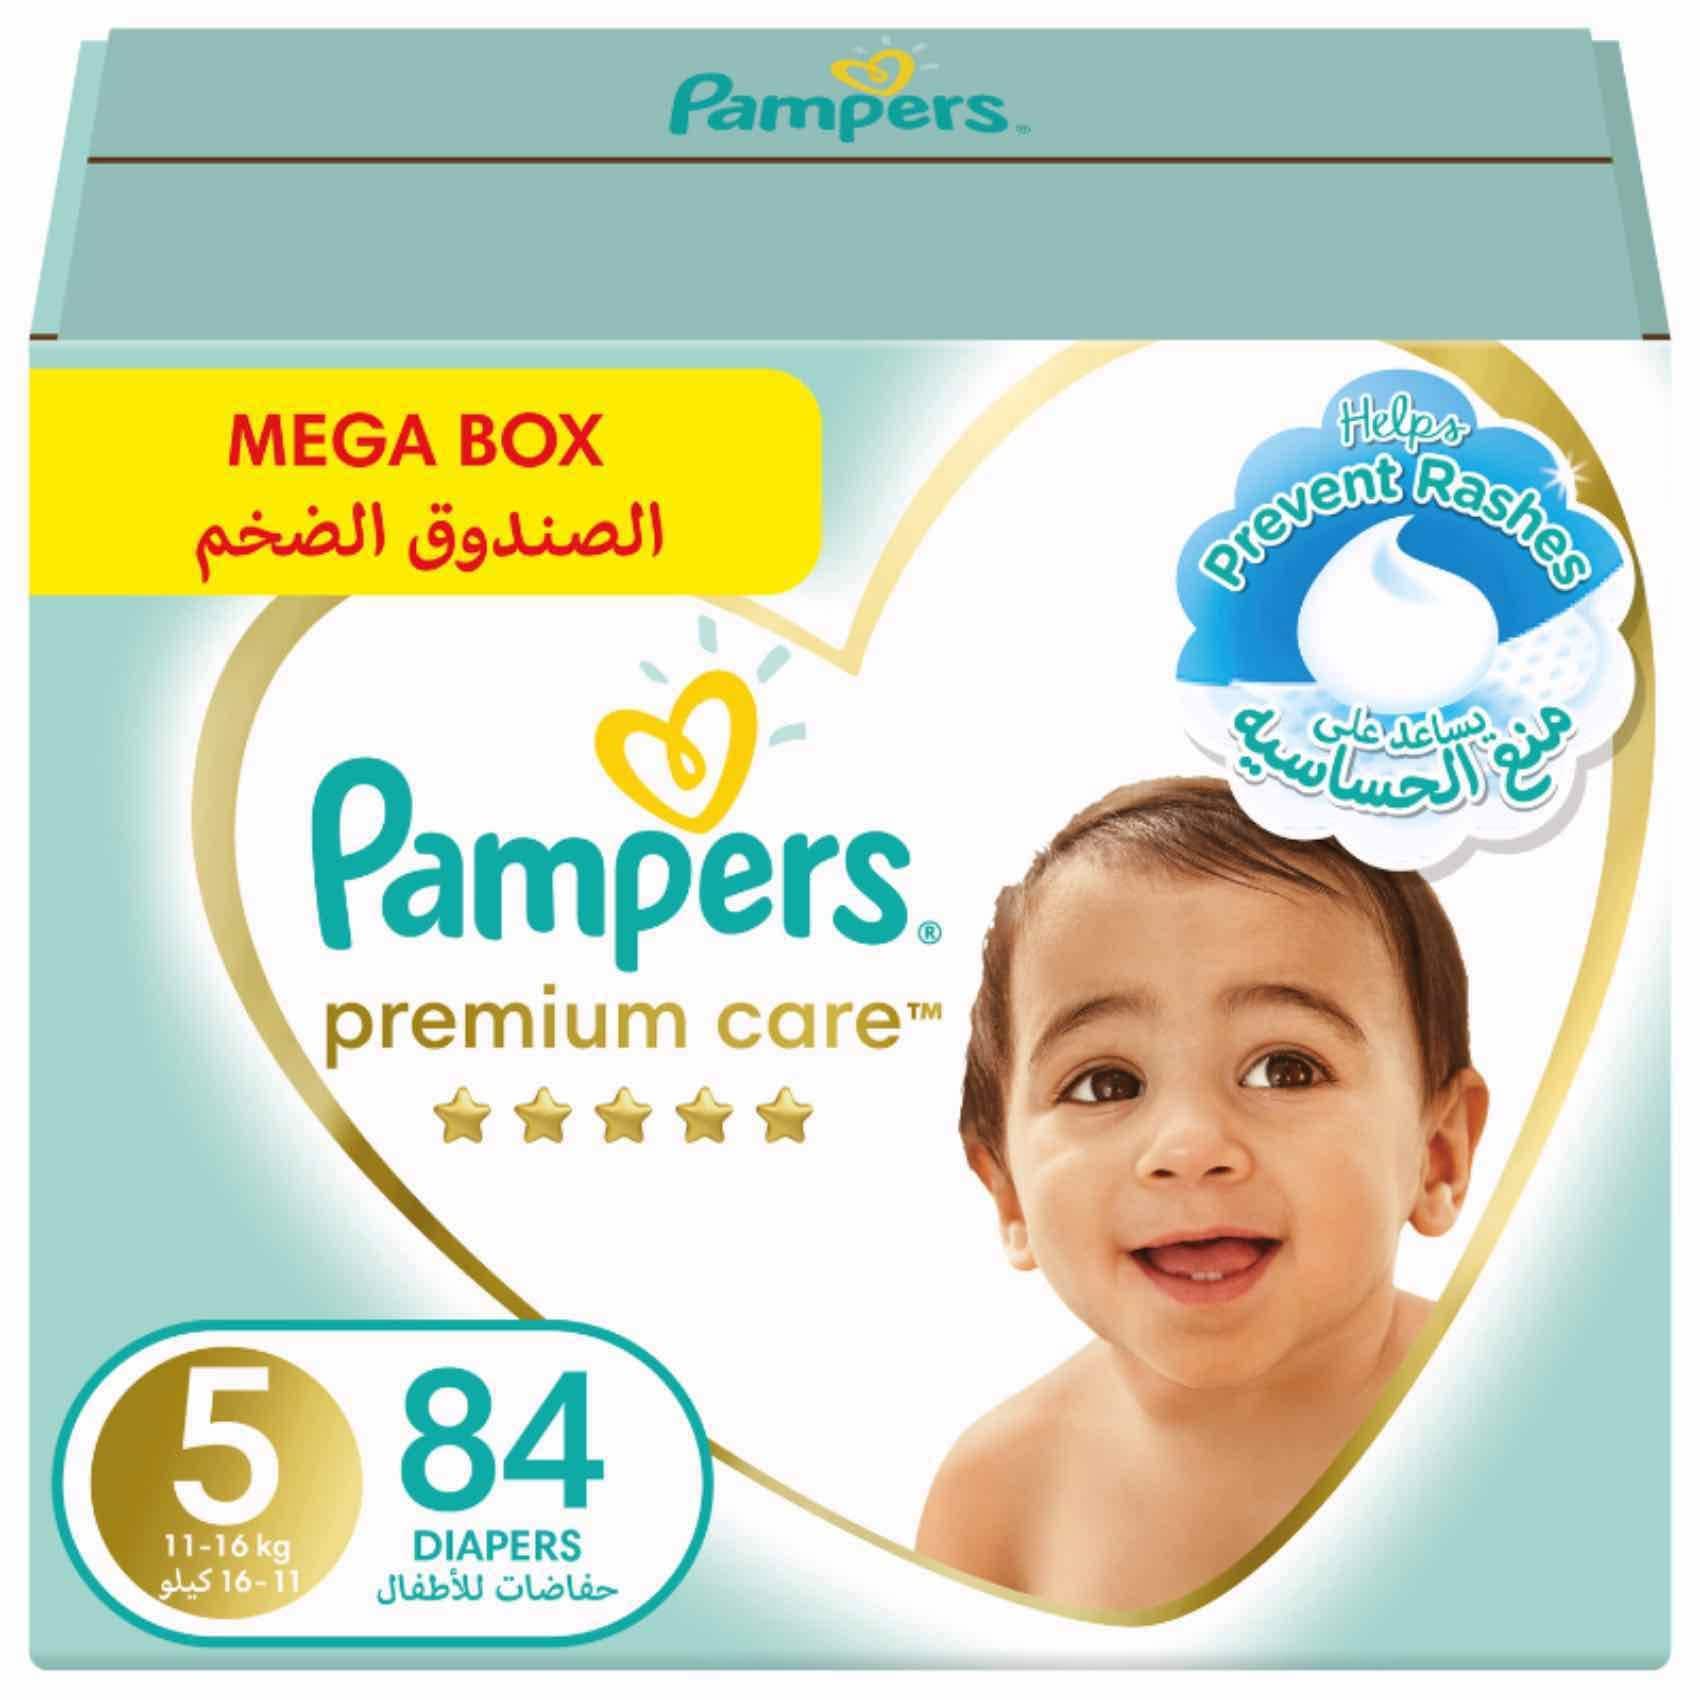 Buy Pampers Premium Care Taped Diapers, Size 5, 11-16kg, Mega Box, 84 Diapers  Online - Shop Baby Products on Carrefour Saudi Arabia